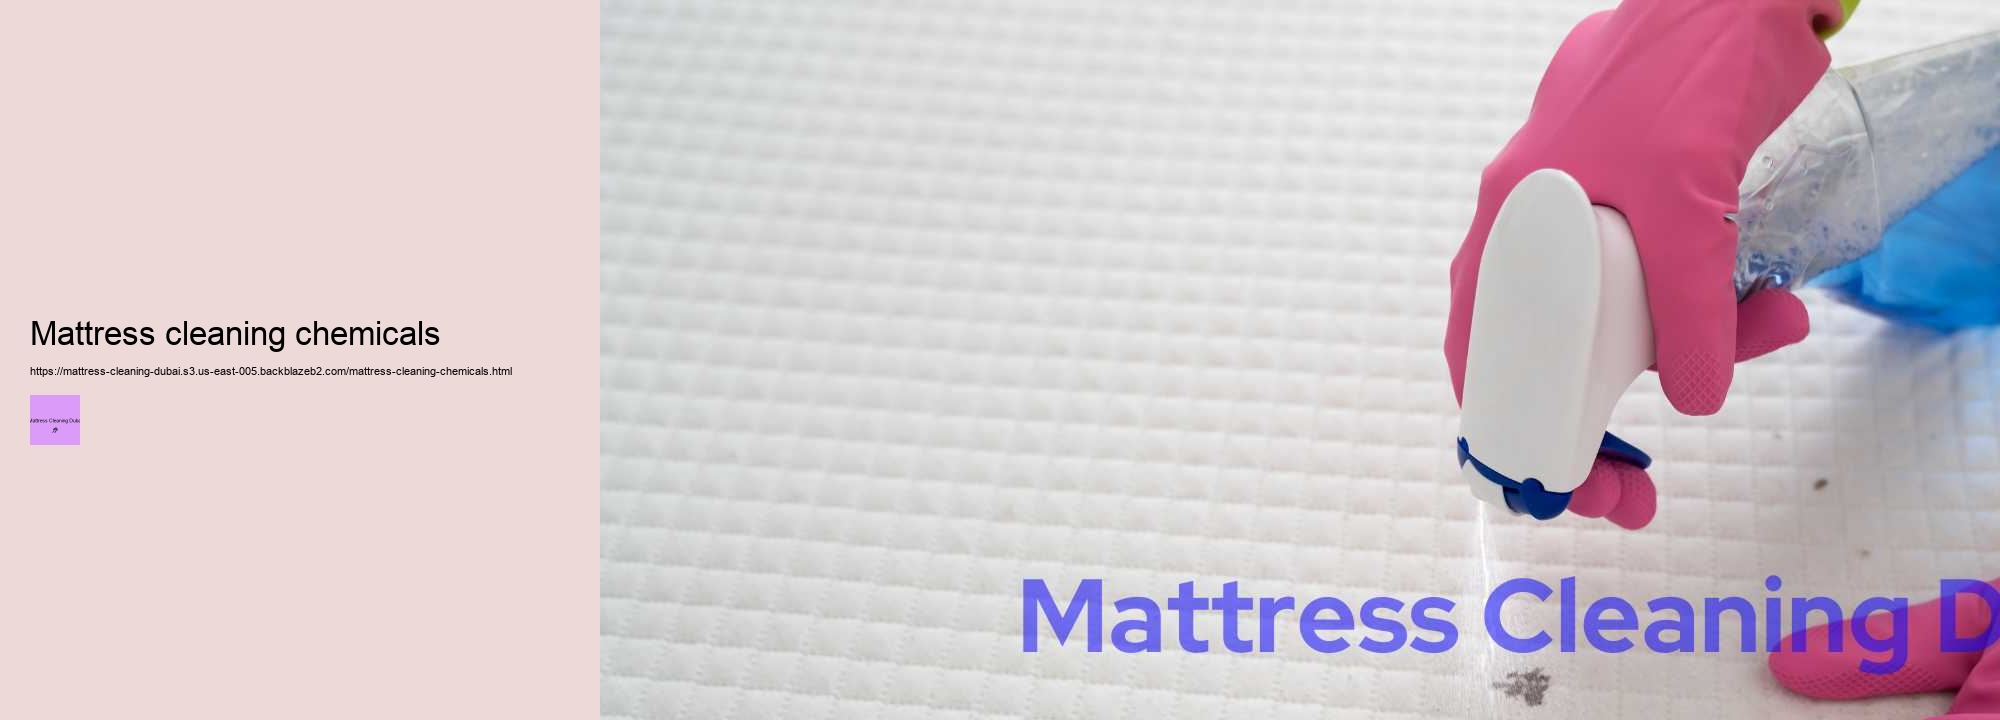 Mattress cleaning chemicals